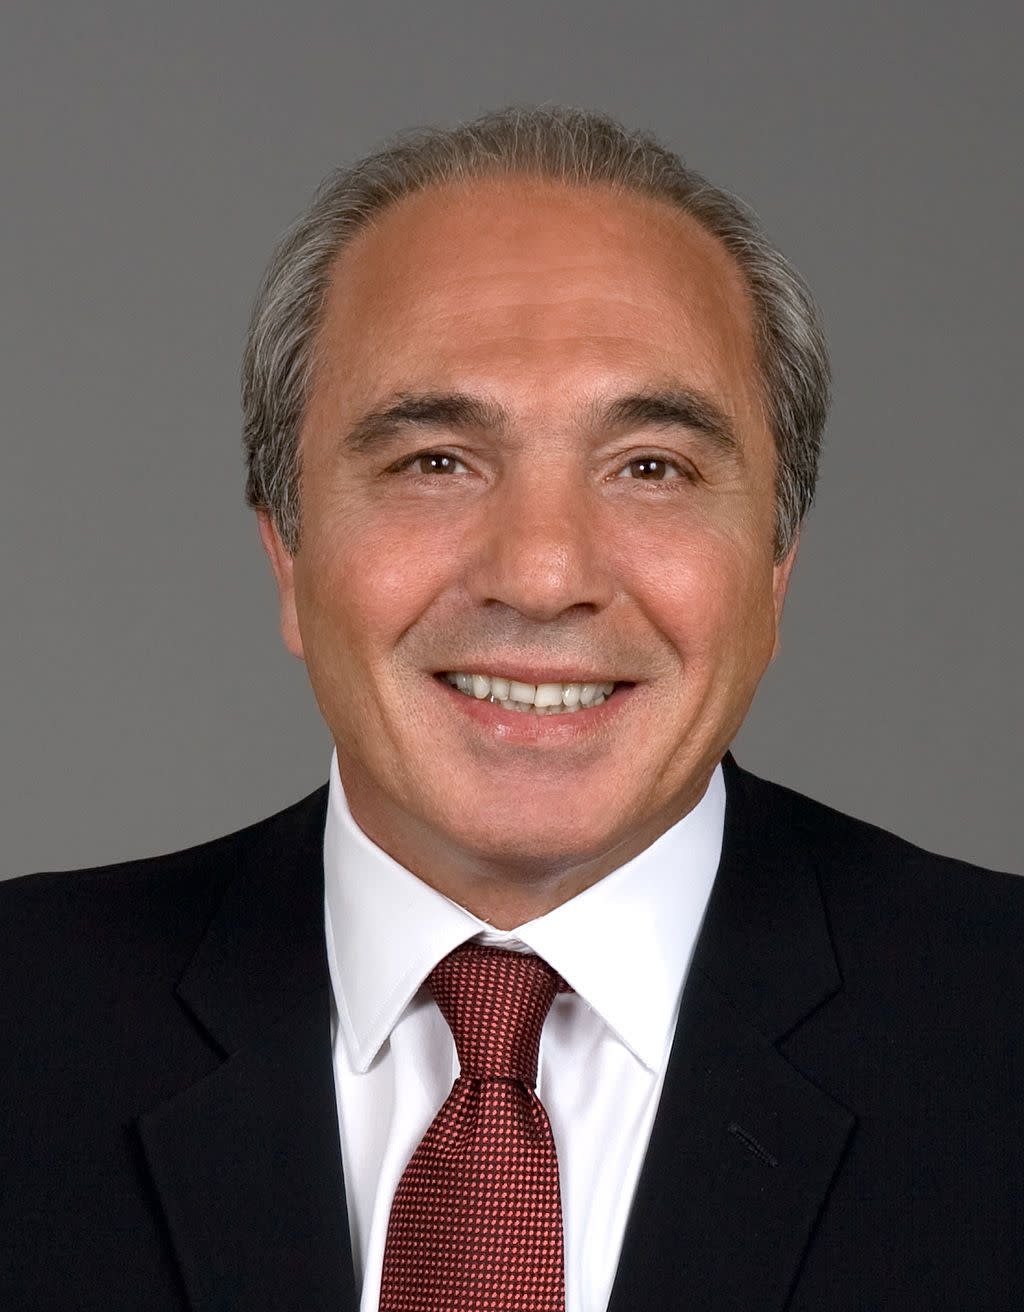 Corporate Headshot of Founder, Chairman & CEO of Mediacom Communications Corp.